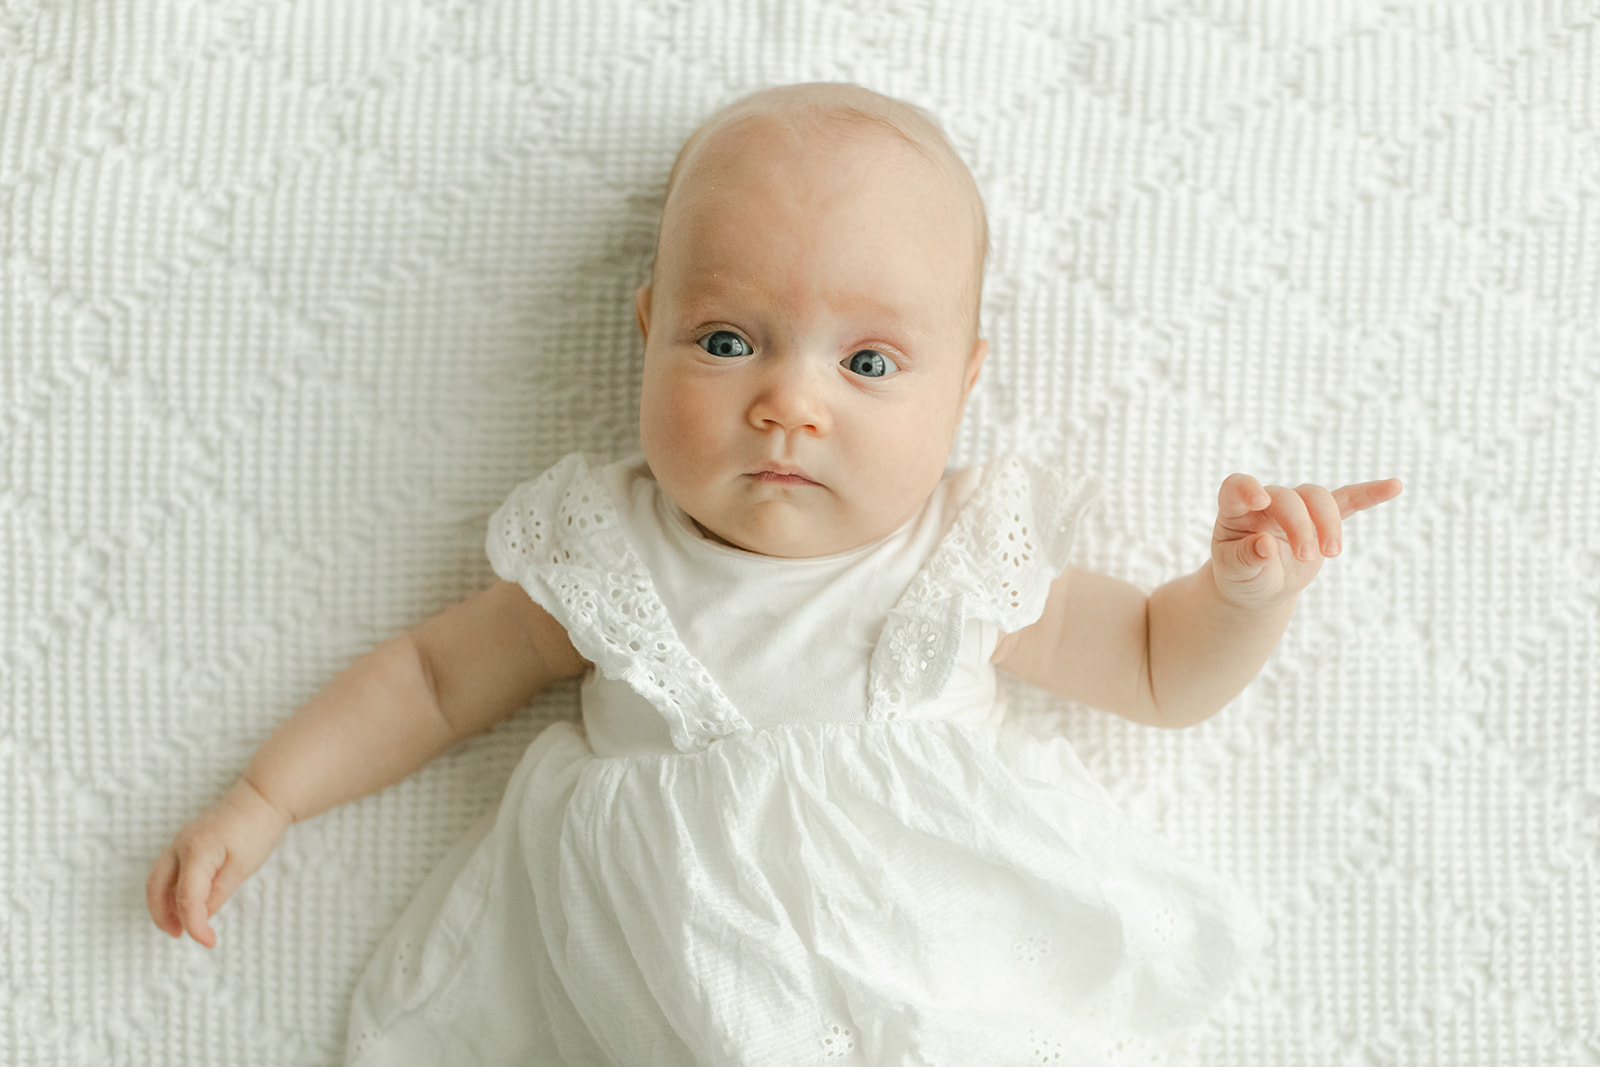 baby Charolette's 3 month milestone session in Nashville, Tennessee.